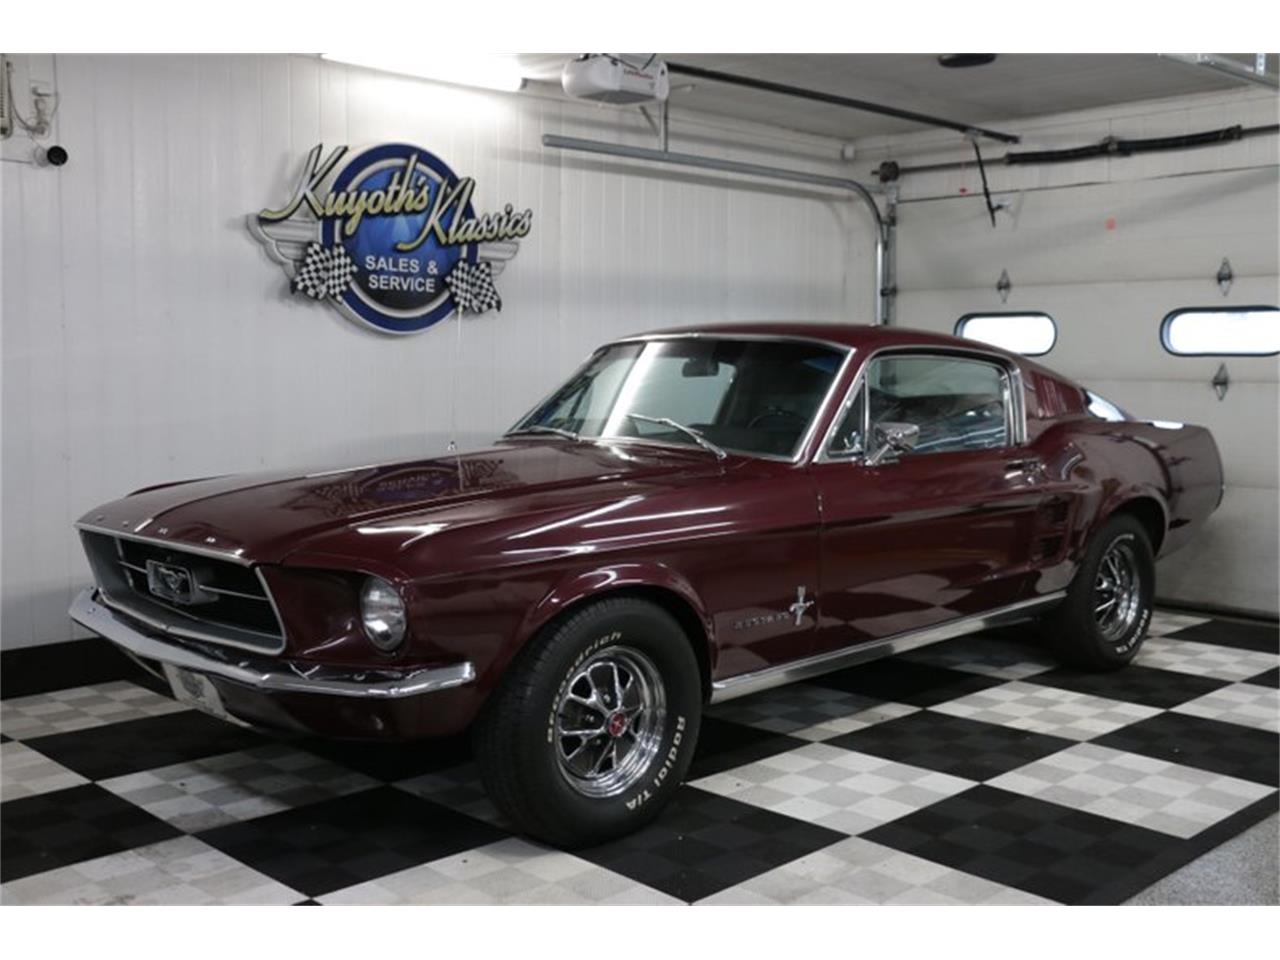 For Sale: 1967 Ford Mustang in Stratford, Wisconsin for sale in Stratford, WI